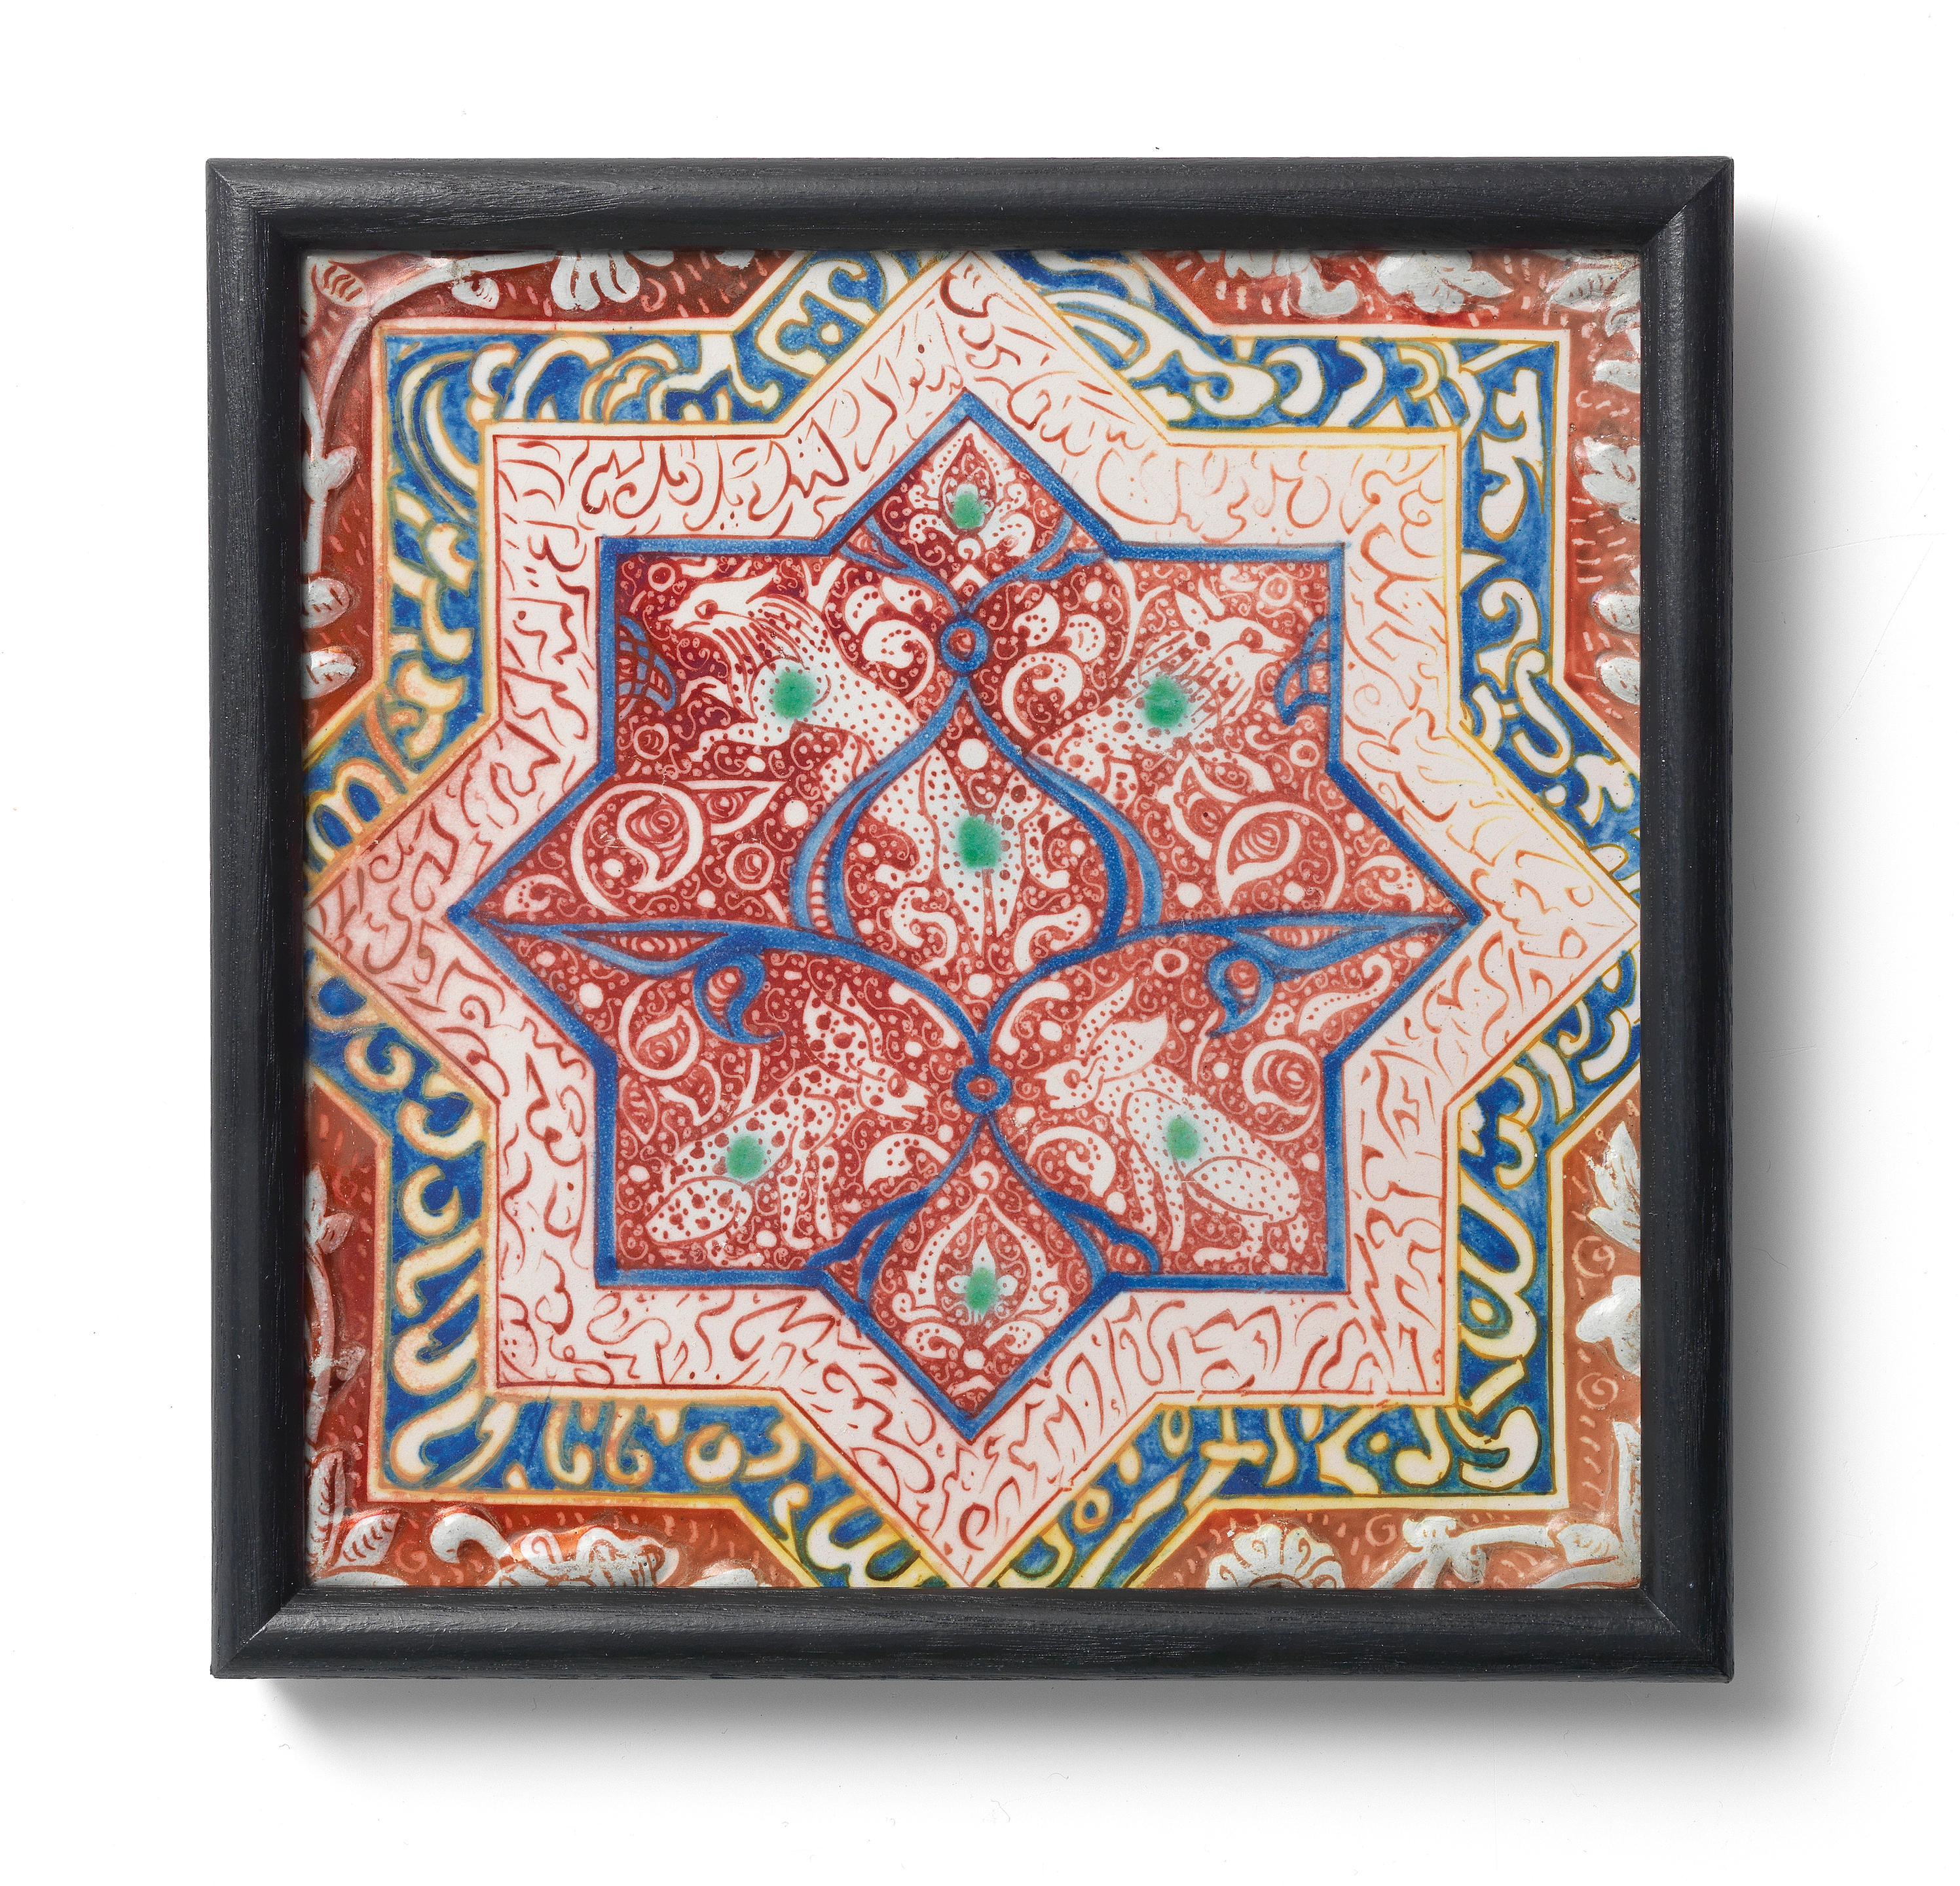 Bonhams A Kashan Lustre Style Tile Attributed To Cantagalli Italy Late 19th Century